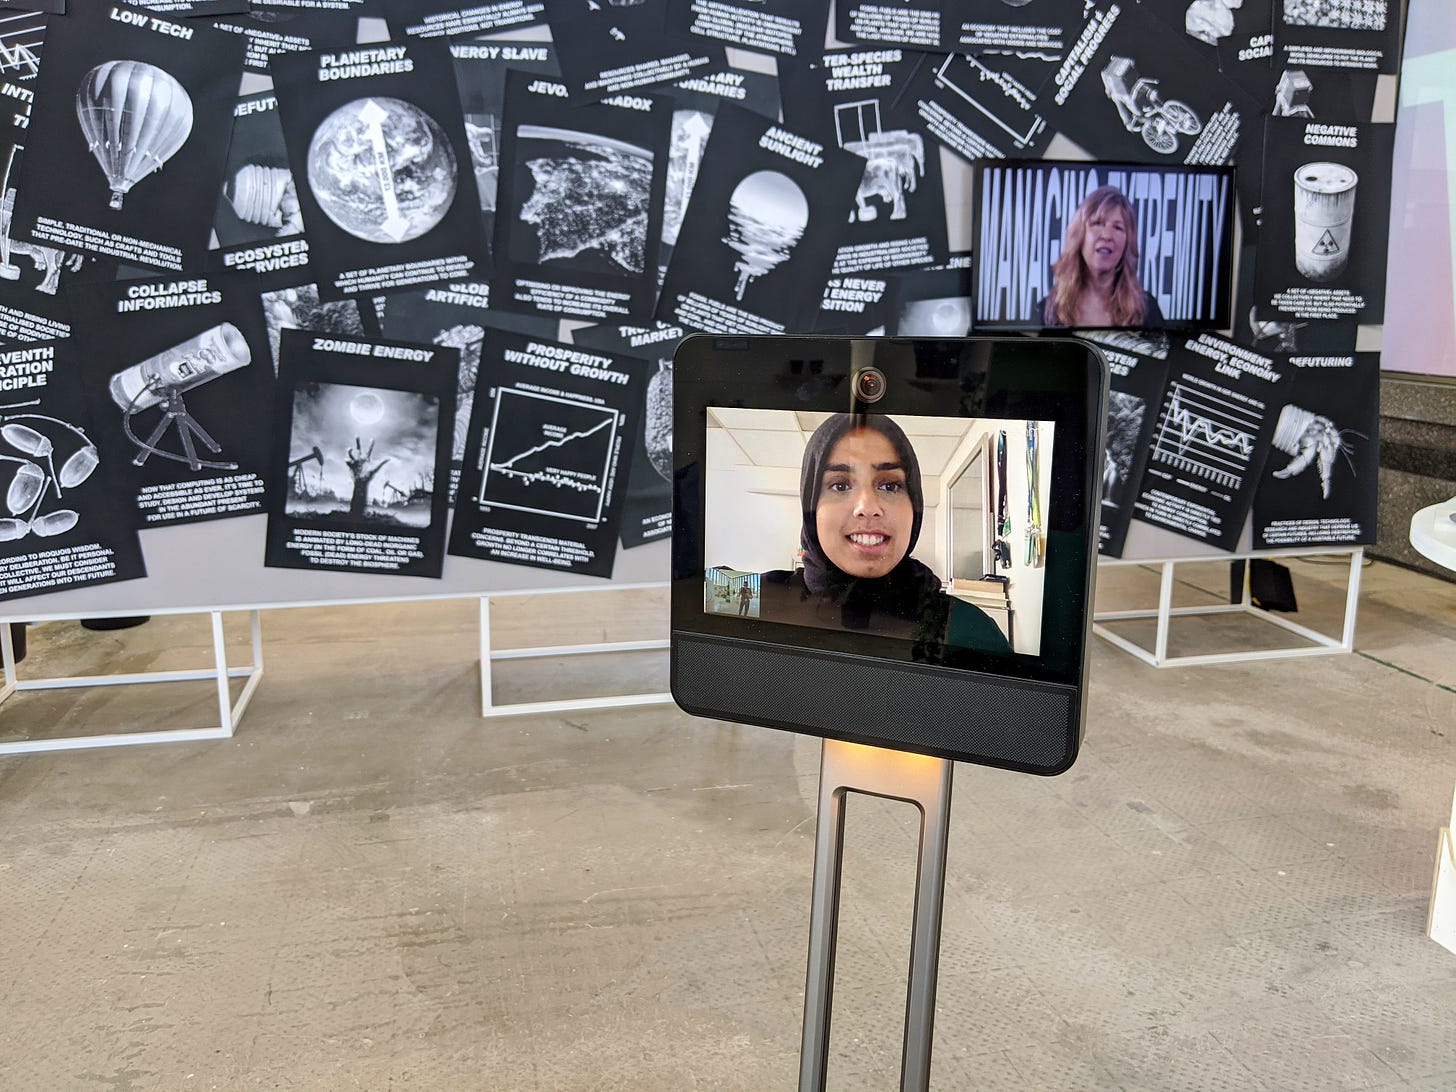 A portrait of a CoLaborator on the screen of a telepresence robot in the Future Present exhibition.